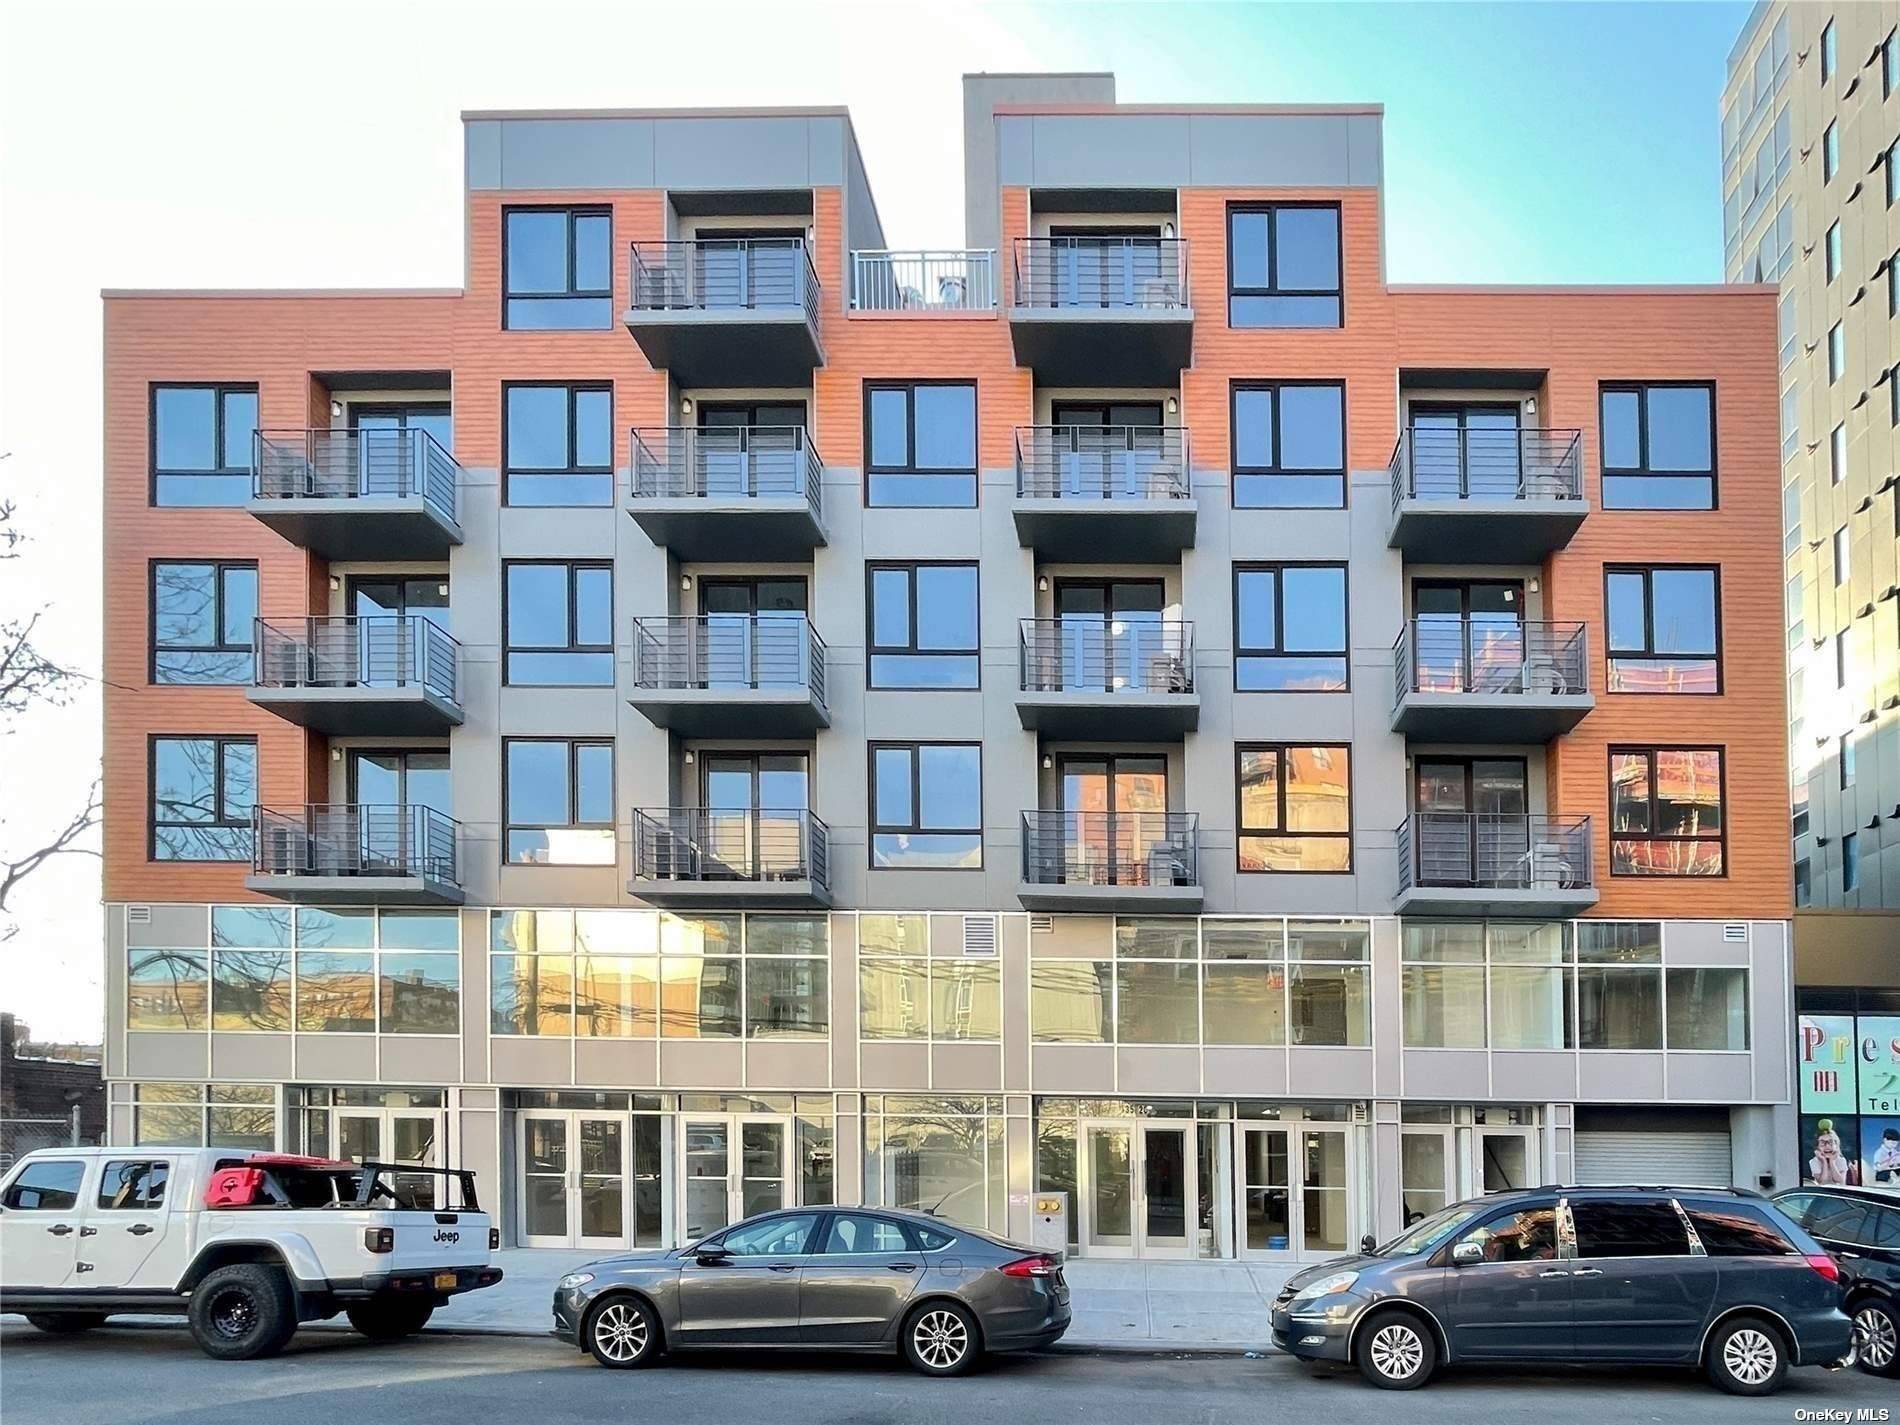 Brand New condominium for sale, Great Location, C O ready, washer amp ; Dryer in unit, close to bus stop, subway, LIRR, near H mart, 7 11, rite aid, Stainless ...